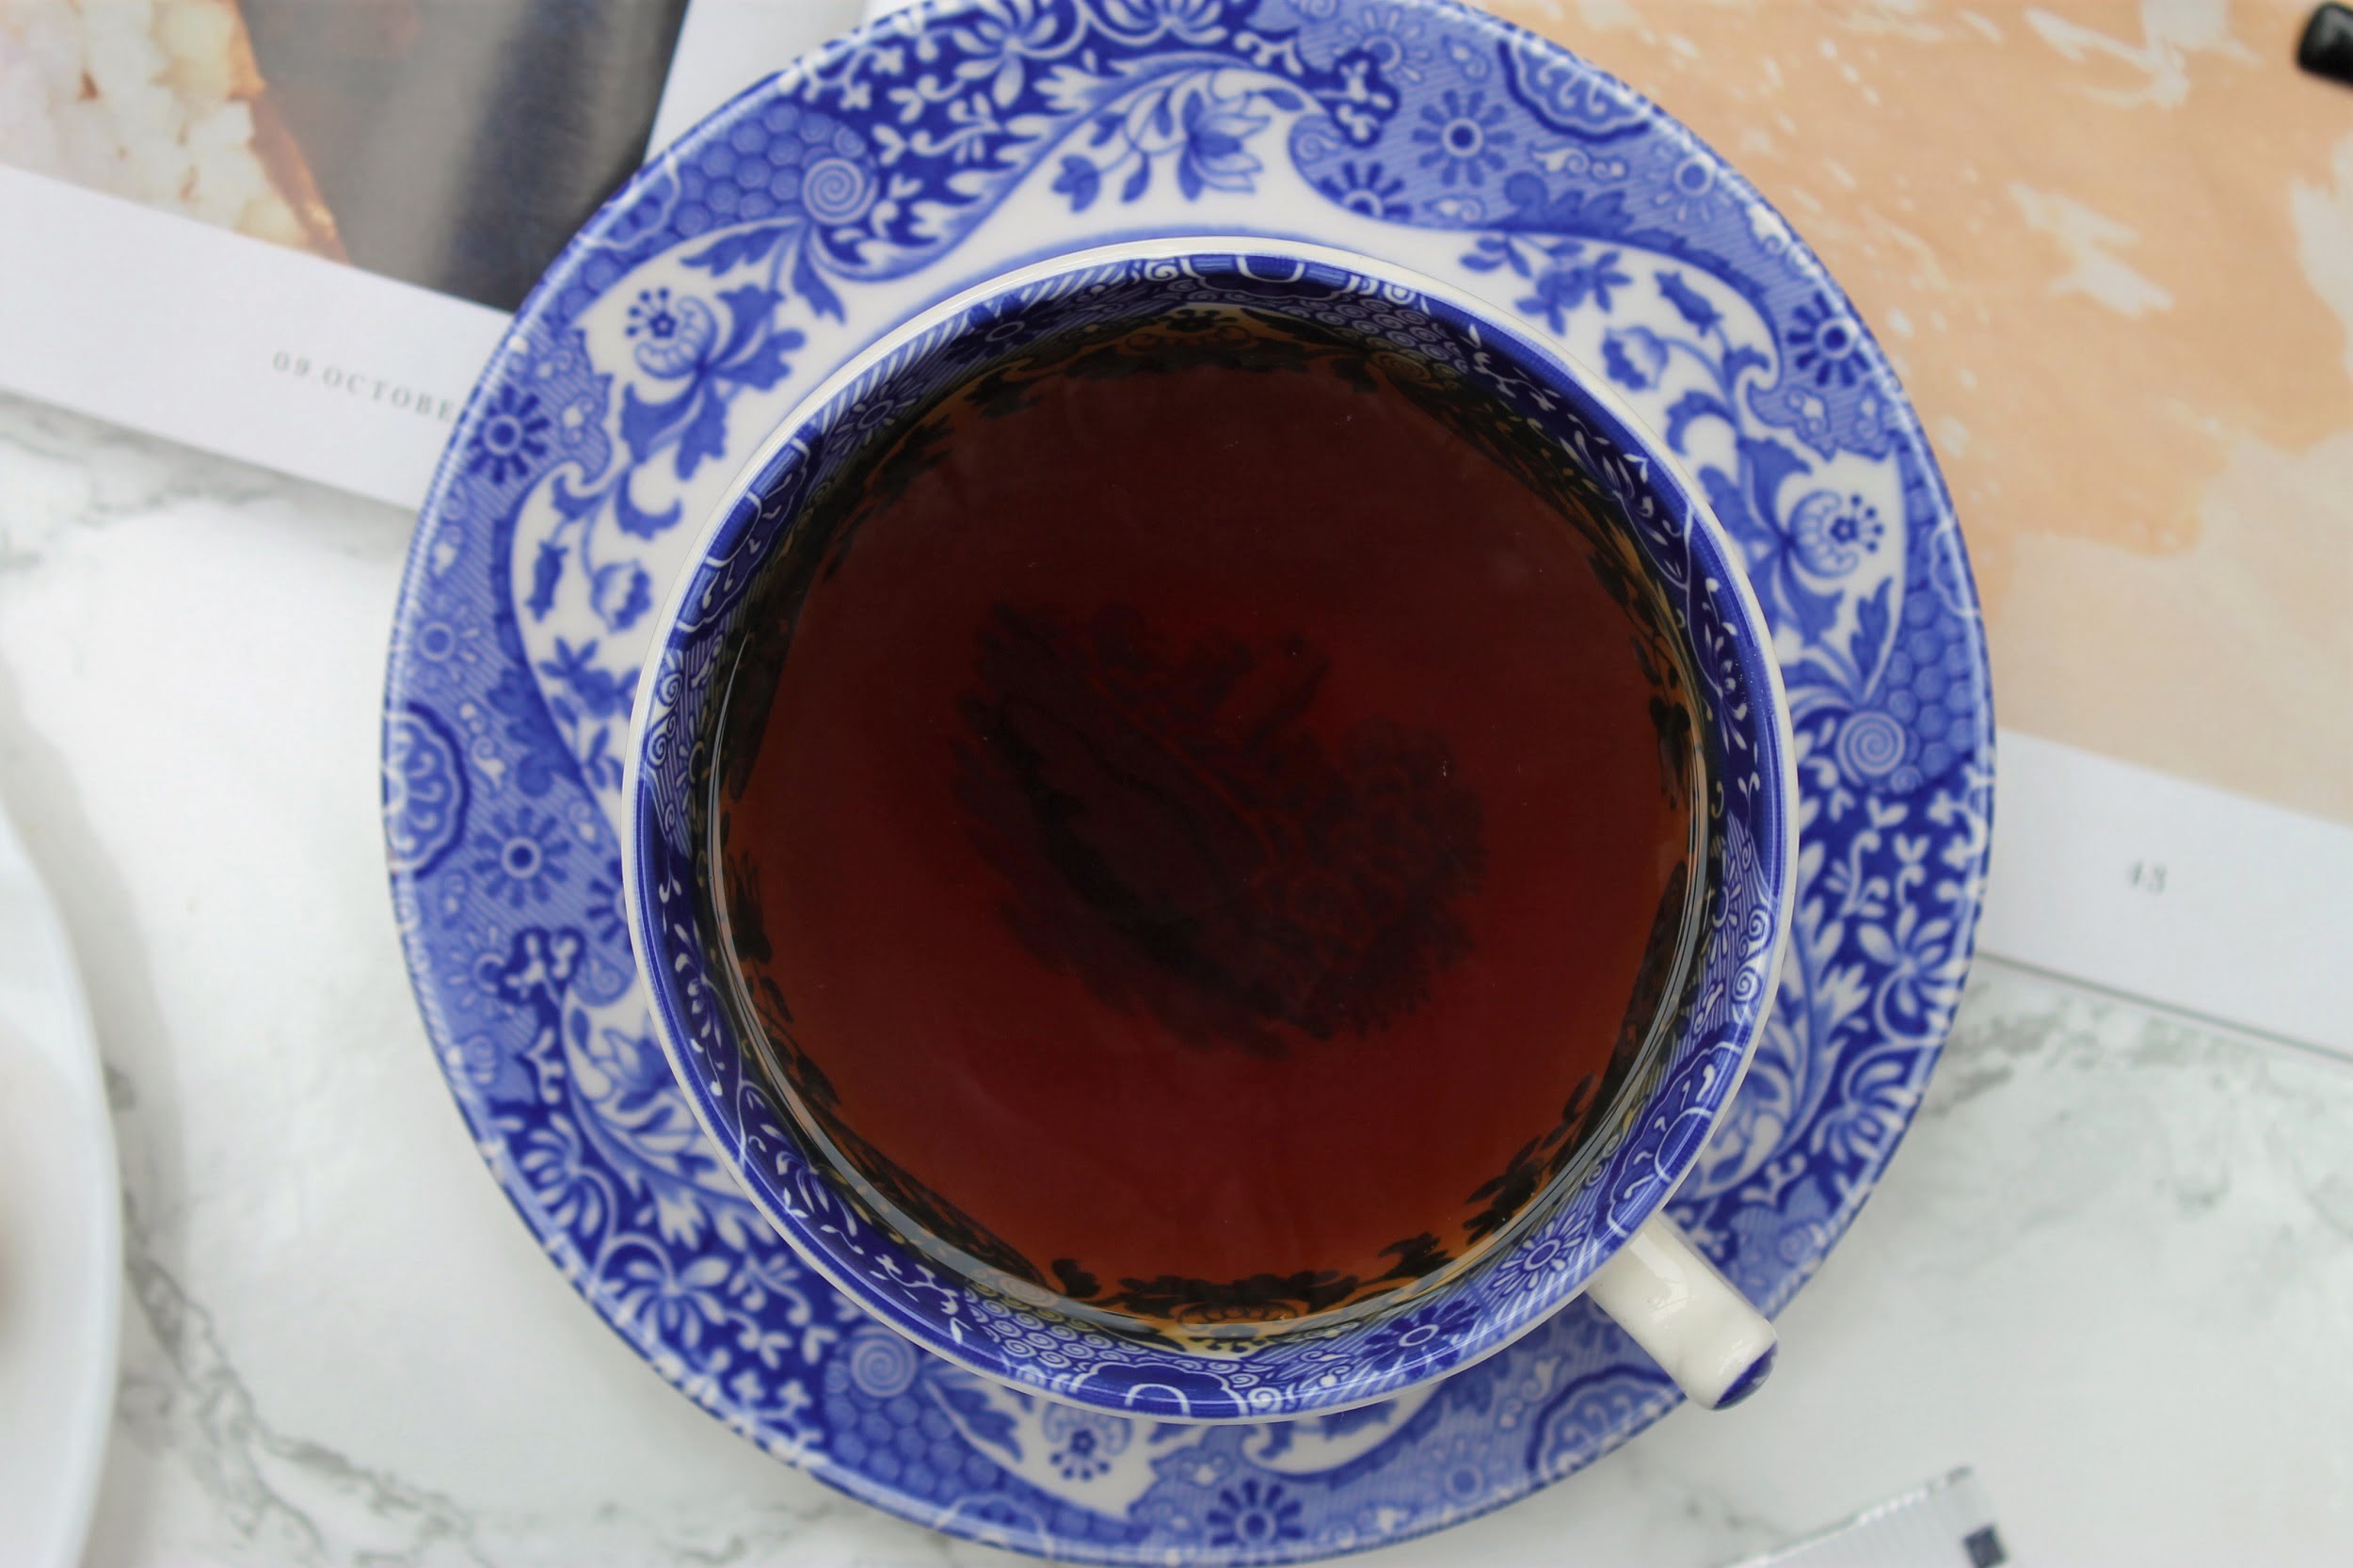 english breakfast blend in blue china teacup